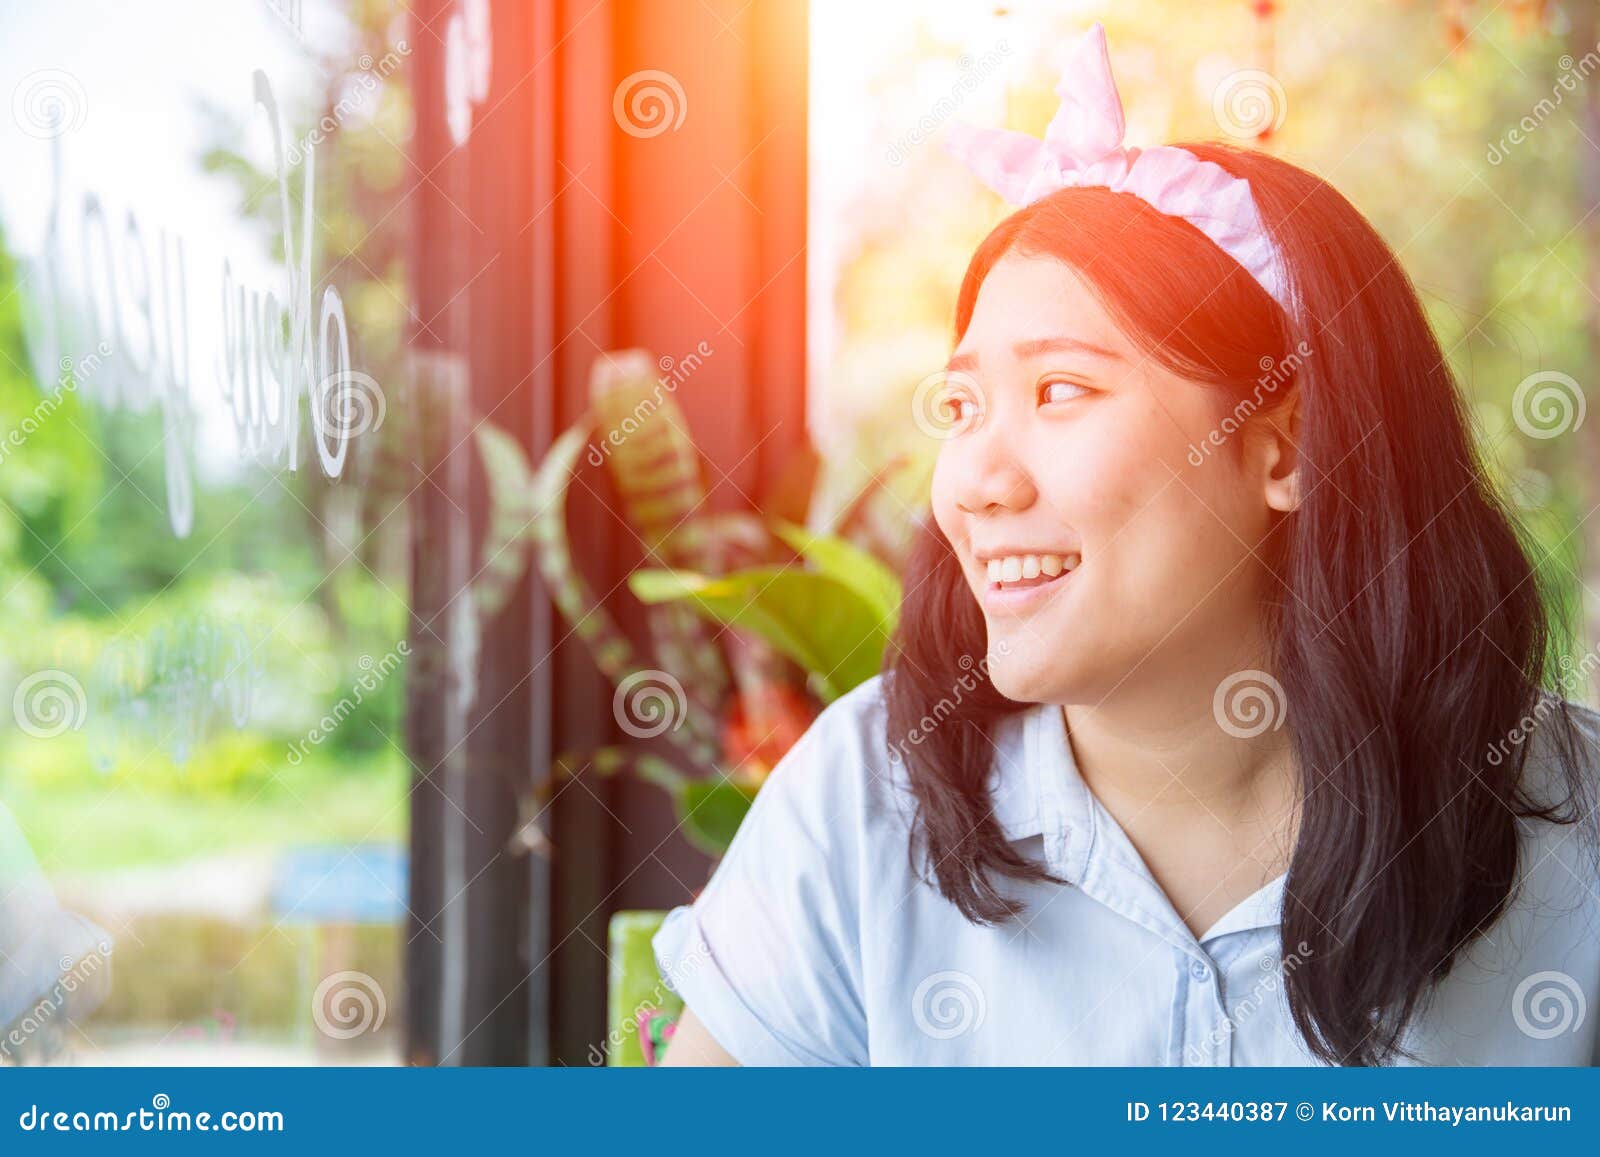 innovatie Macadam accent Cute Asian Chubby Plump Fat Young Teen Smile Stock Image - Image of lovely,  background: 123440387